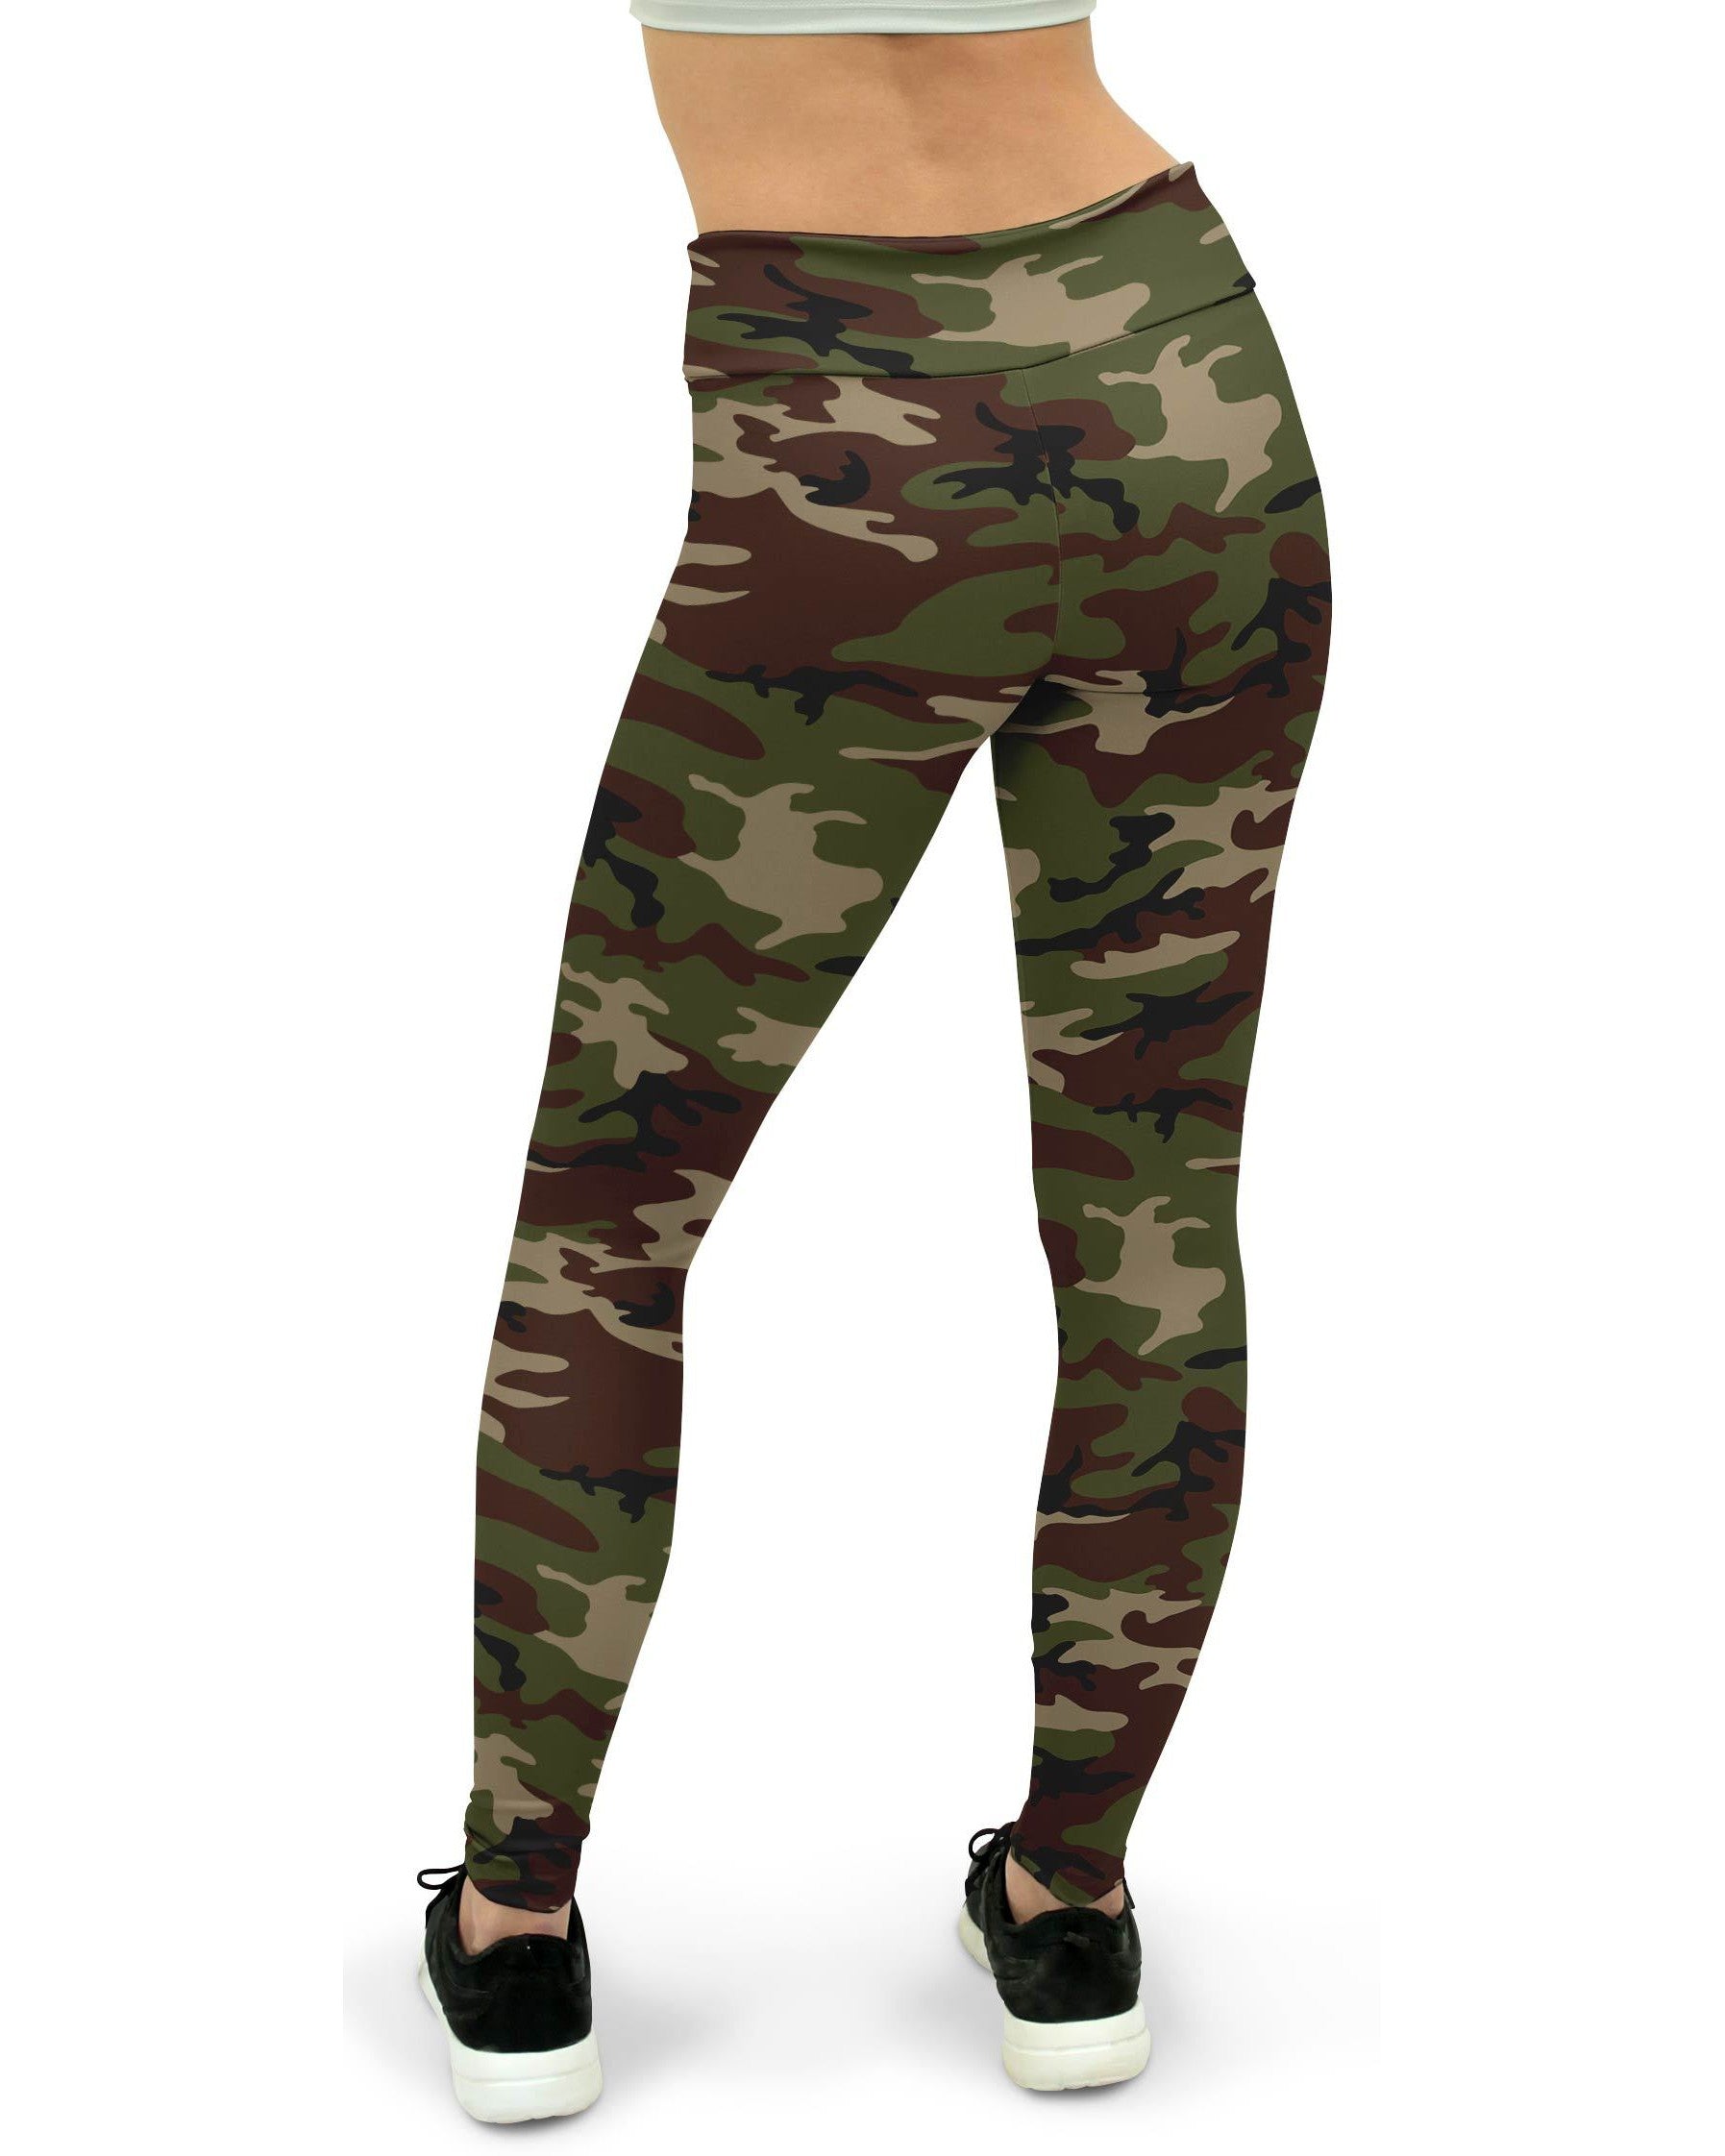 6 Day Army Workout Pants for Women